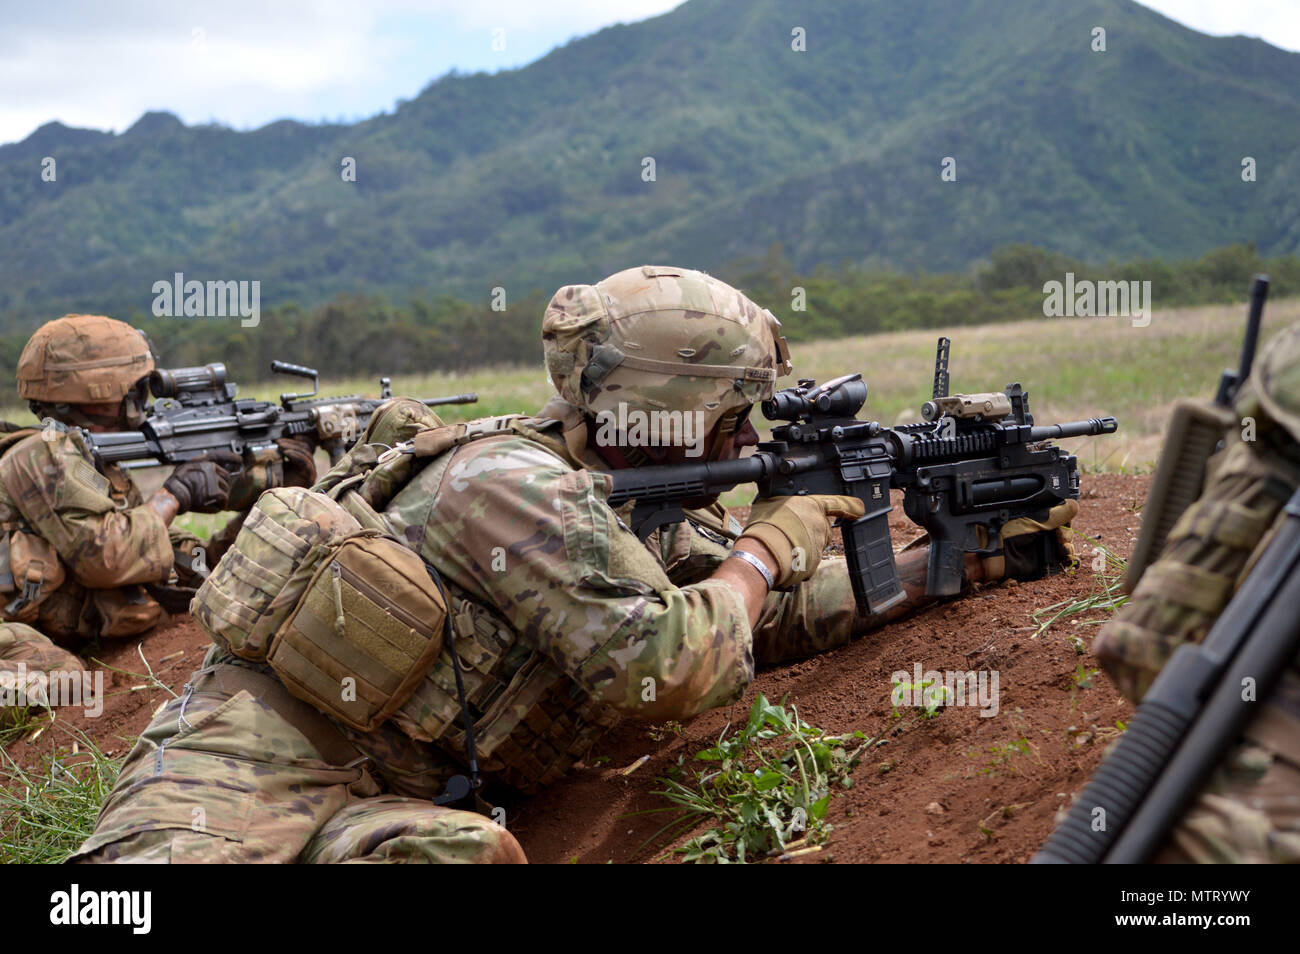 Soldiers assigned to 2nd Battalion, 27th Infantry Regiment, 3rd Brigade Combat Team, 25th Infantry Division fire at a target during a live fire exercise for Tiger Balm 18 at Schofield Barracks, Hawaii, on May 23, 2018. Tiger Balm is a bilateral exercise held yearly between the U.S. and Singapore armies. (U.S. Army photo by Staff Sgt. Armando R. Limon, 3rd Brigade Combat Team, 25th Infantry Division) Stock Photo